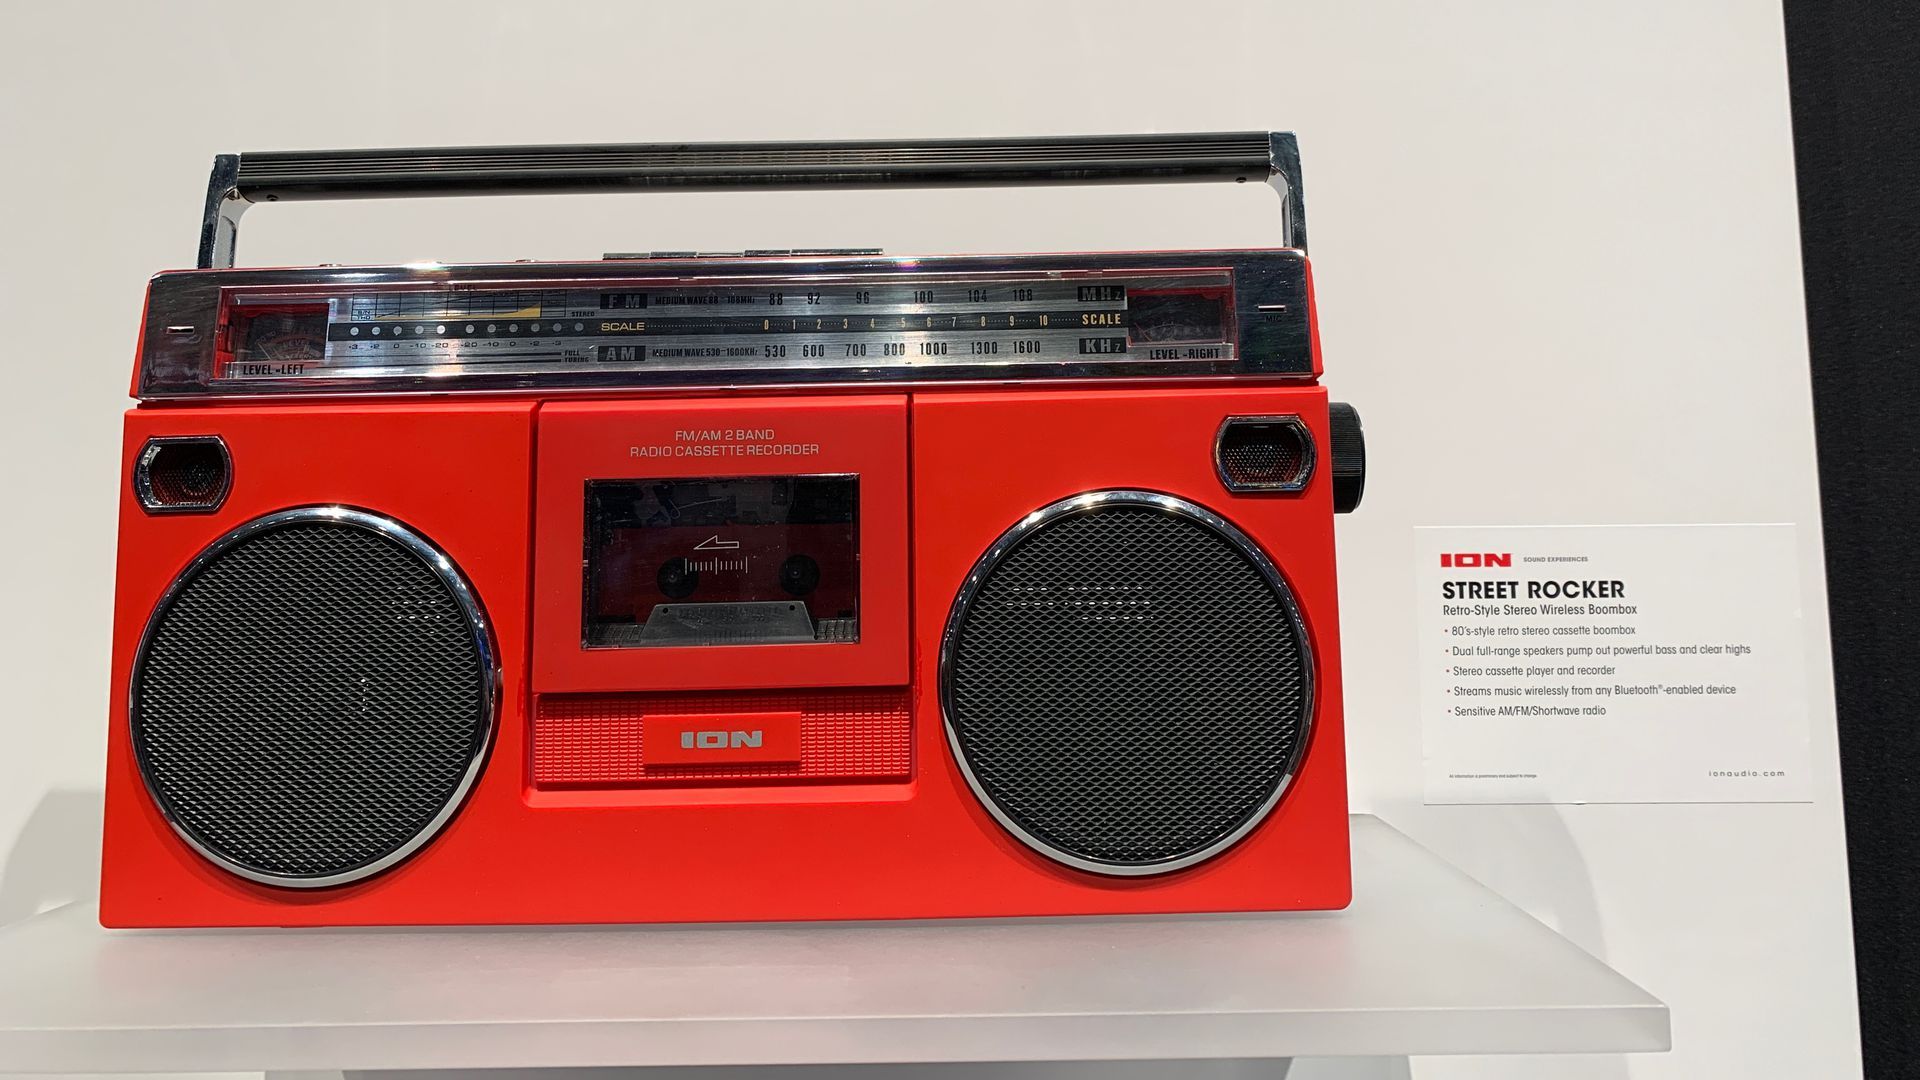 A red boombox